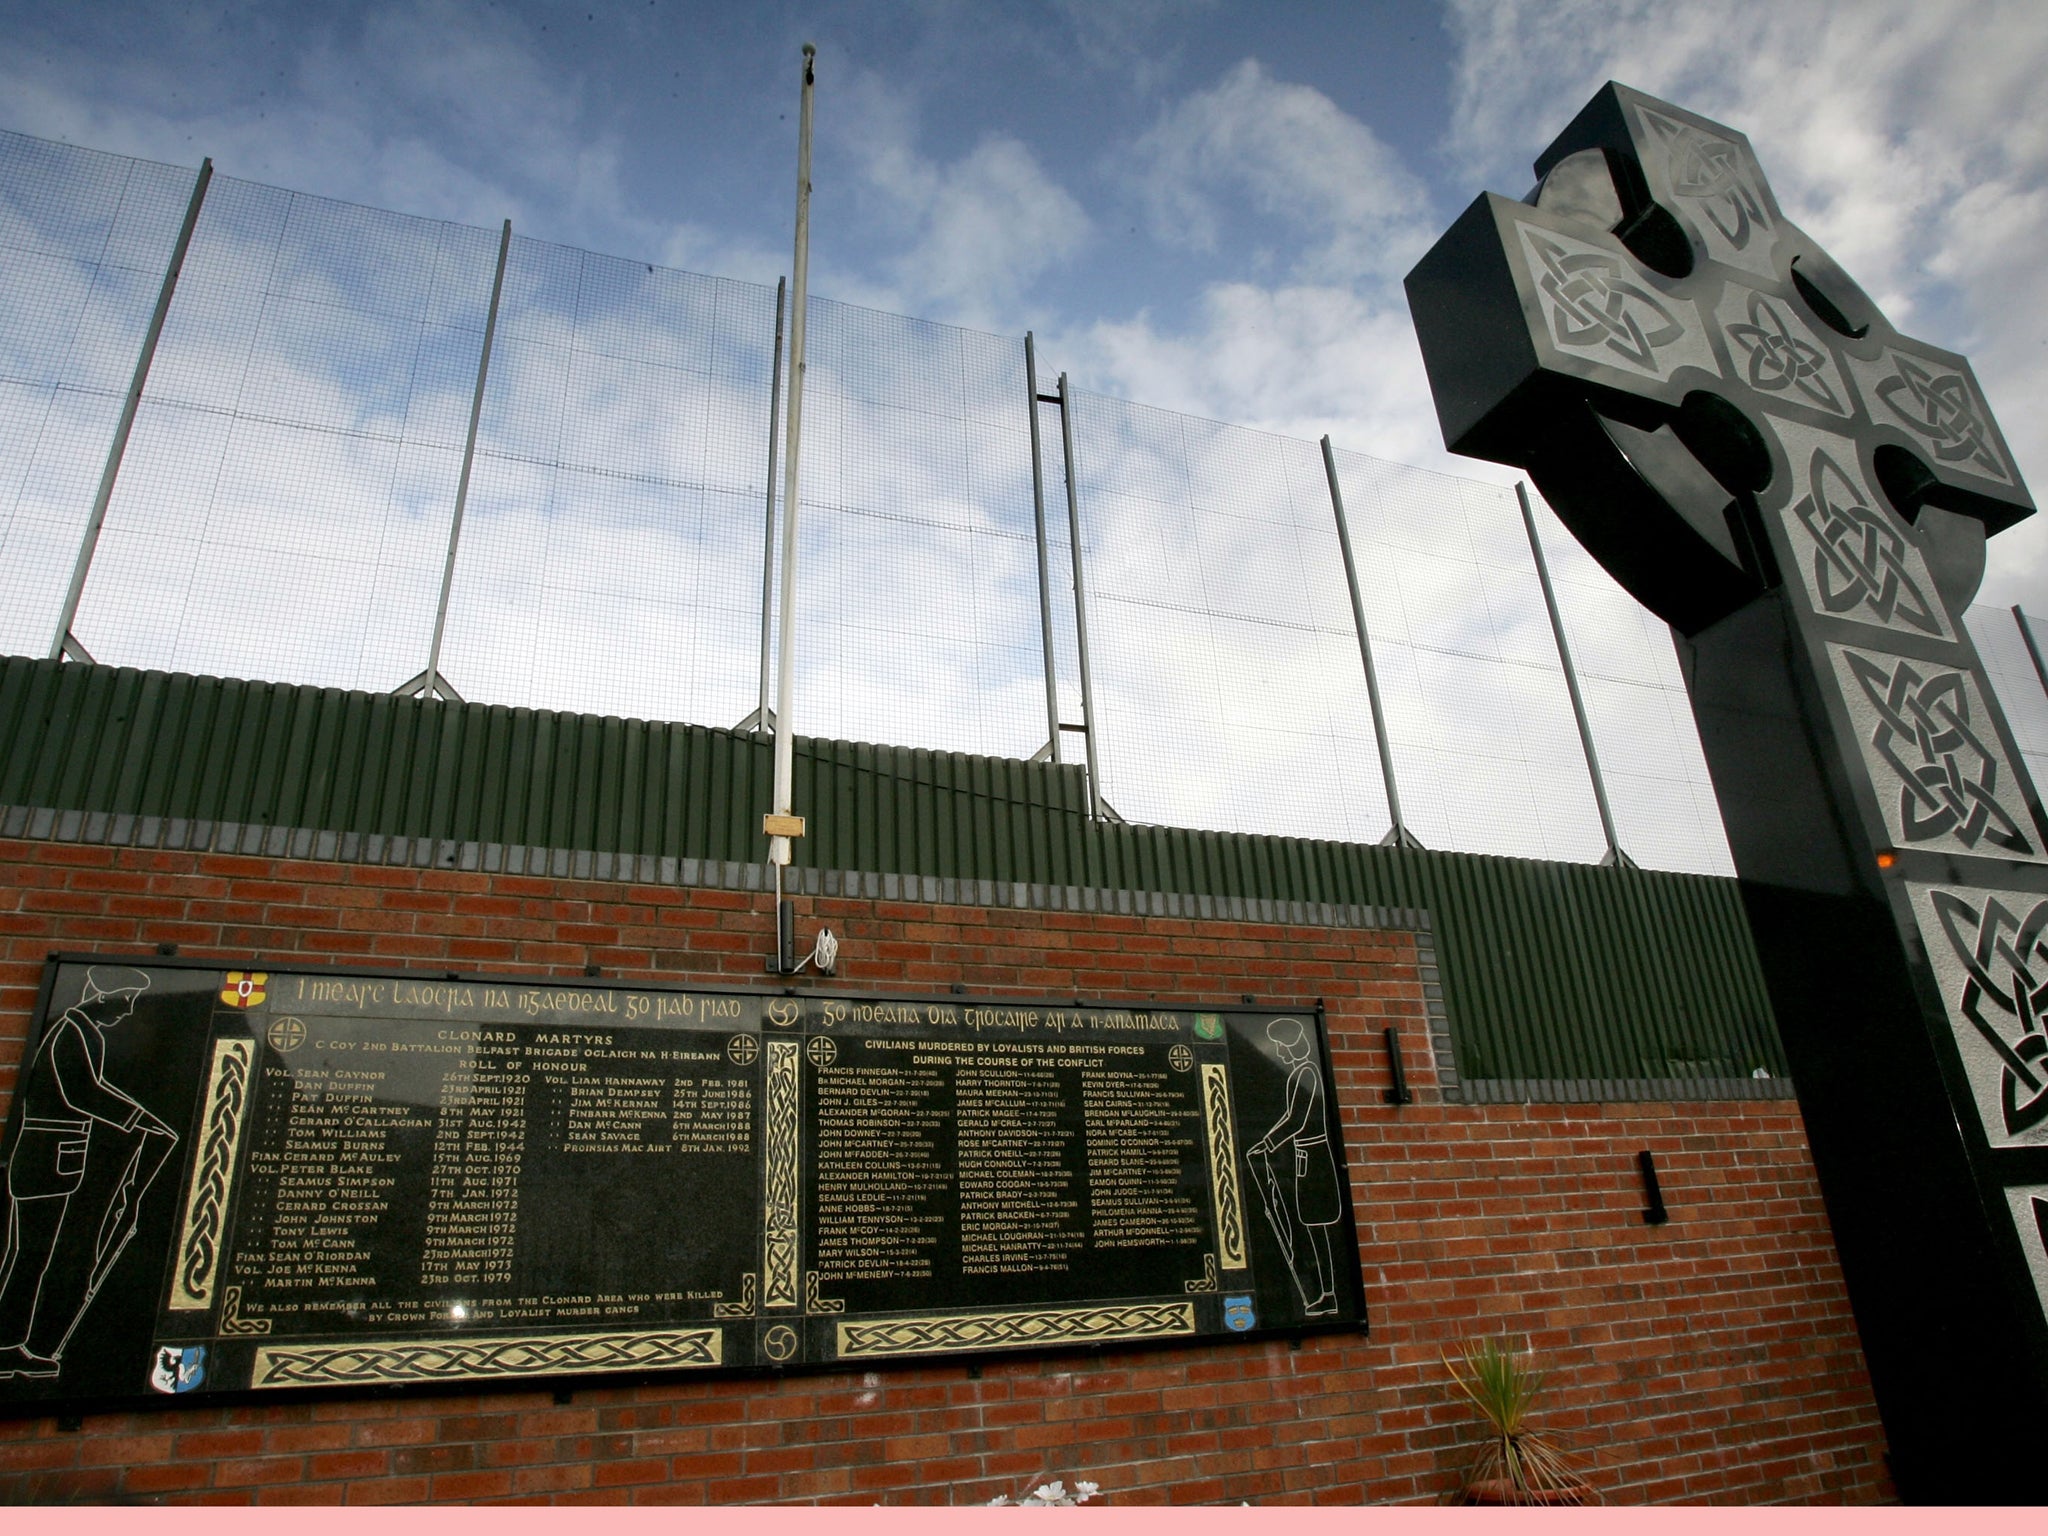 A memorial for IRA volunteers killed in 'the troubles' next to the Peace Line fence in Clonard republican area of West Belfast